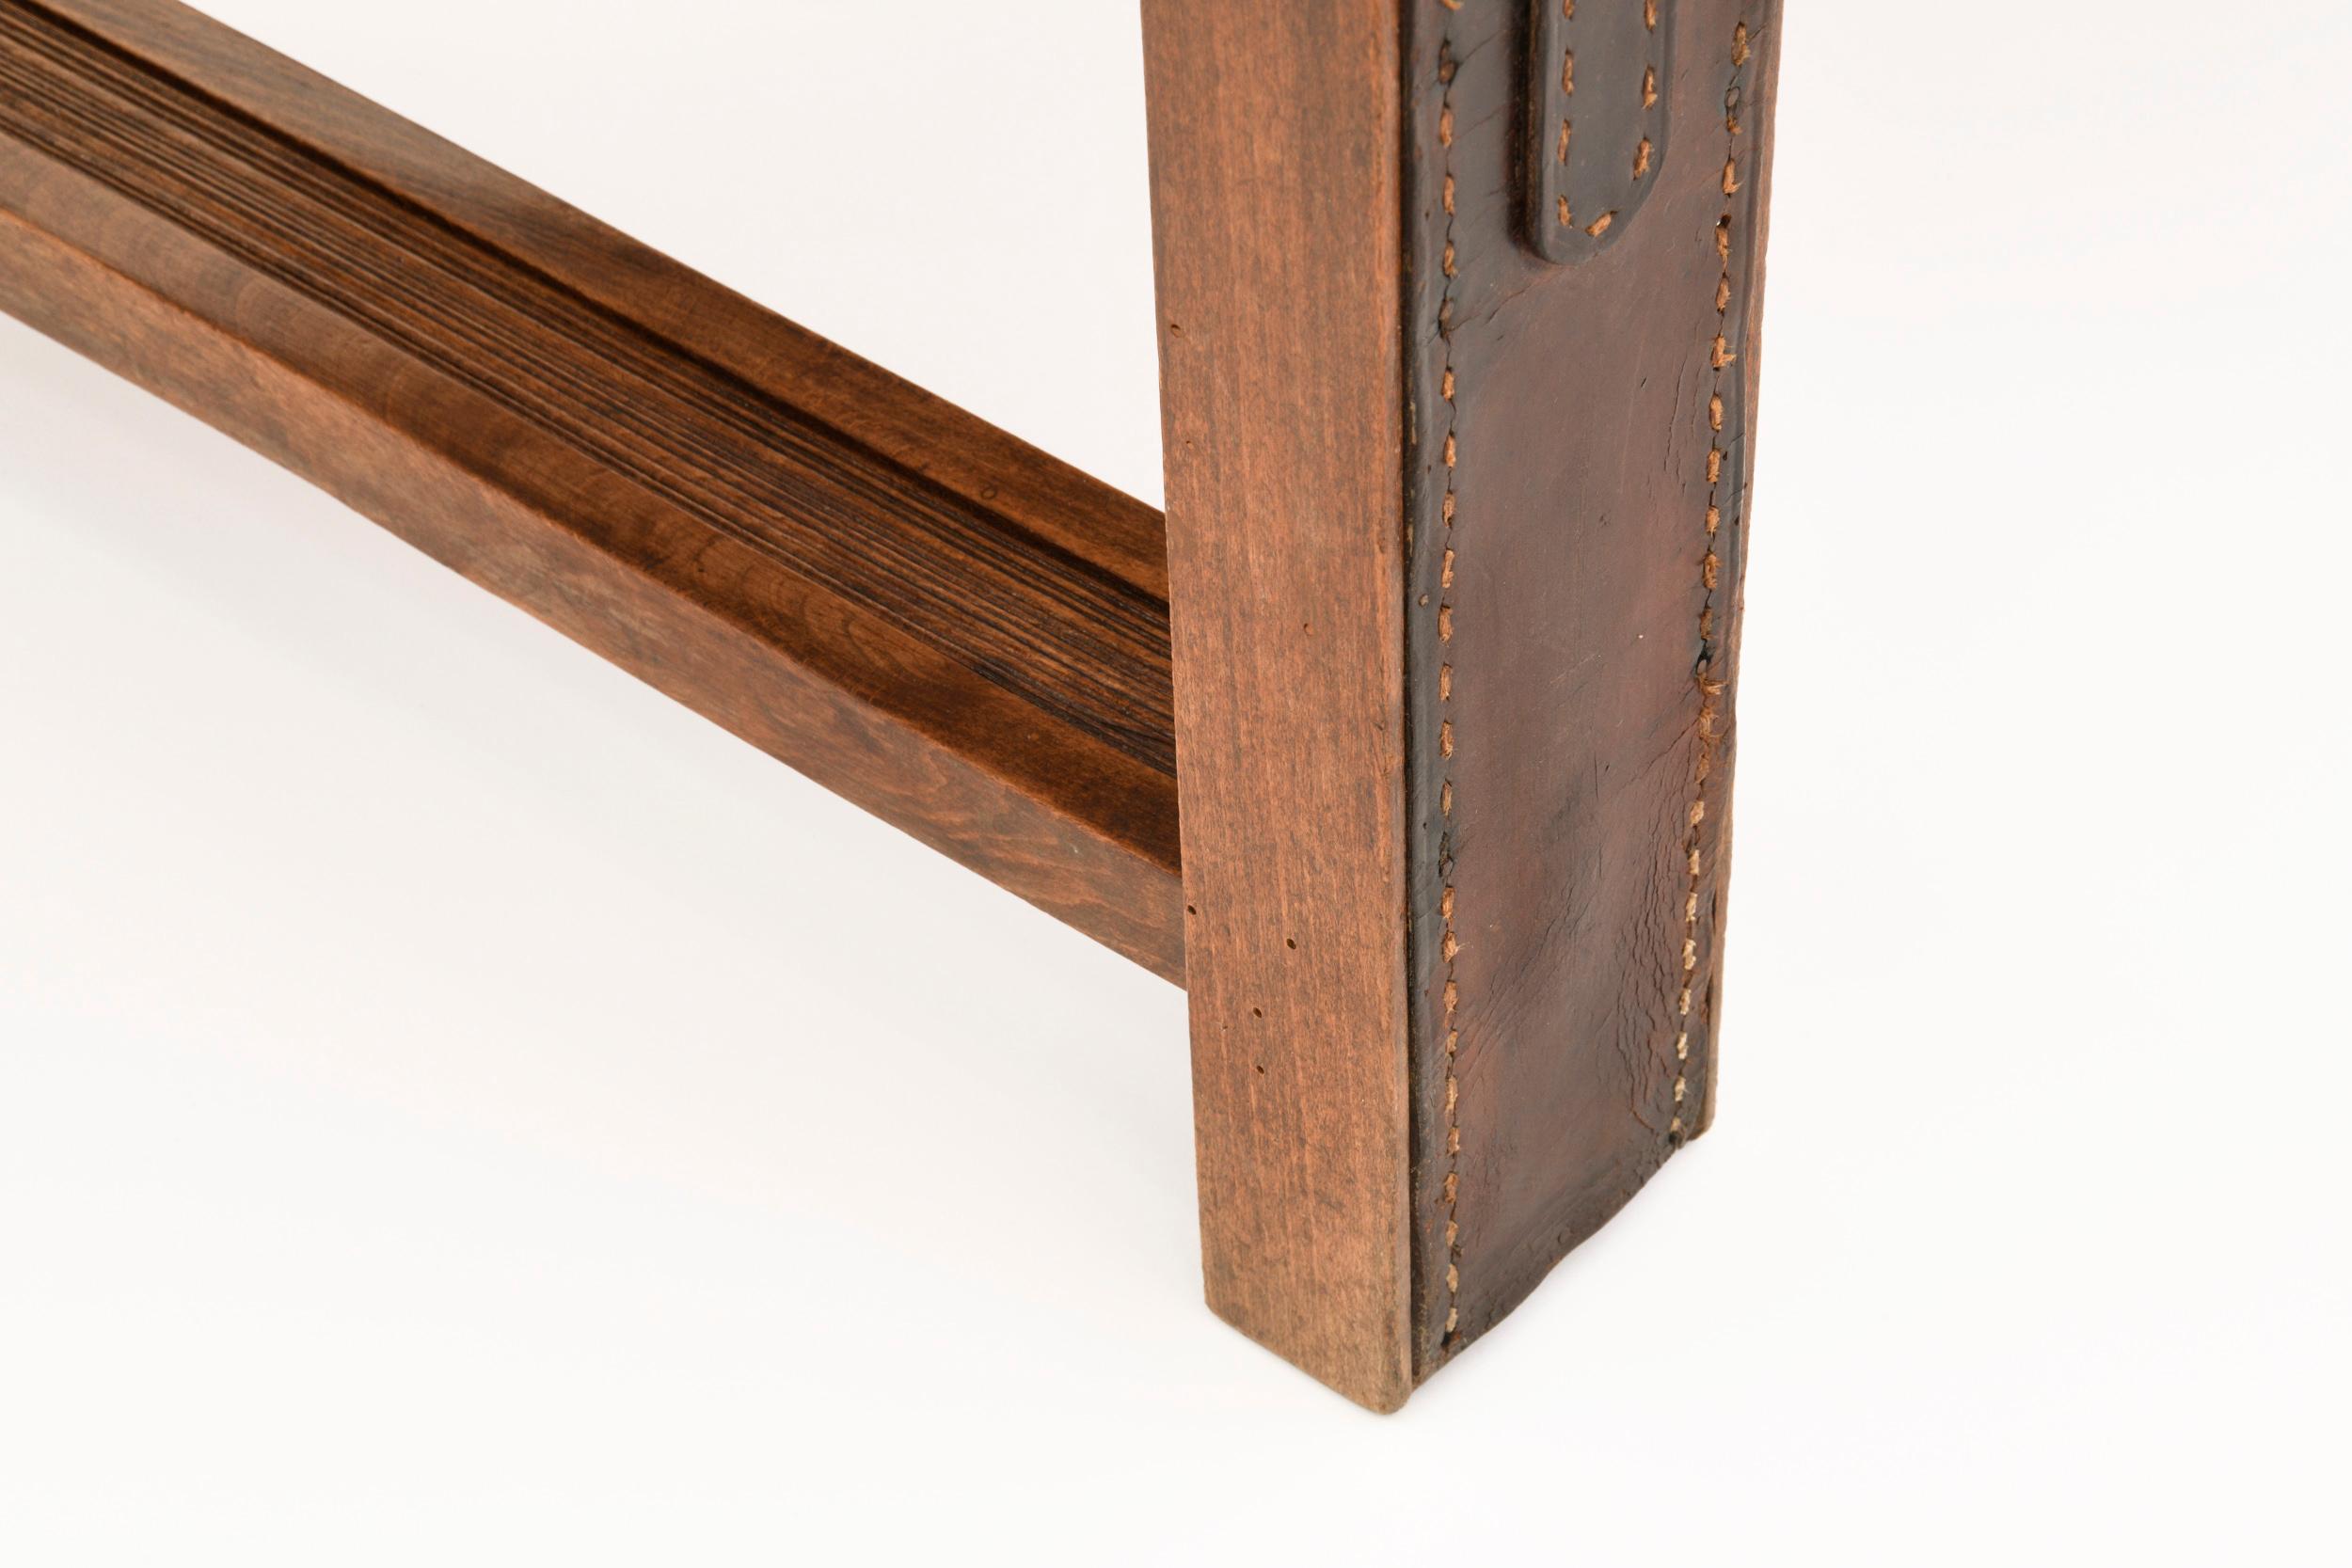 Leather Jacques Adnet, Luggage Bench, circa 1950